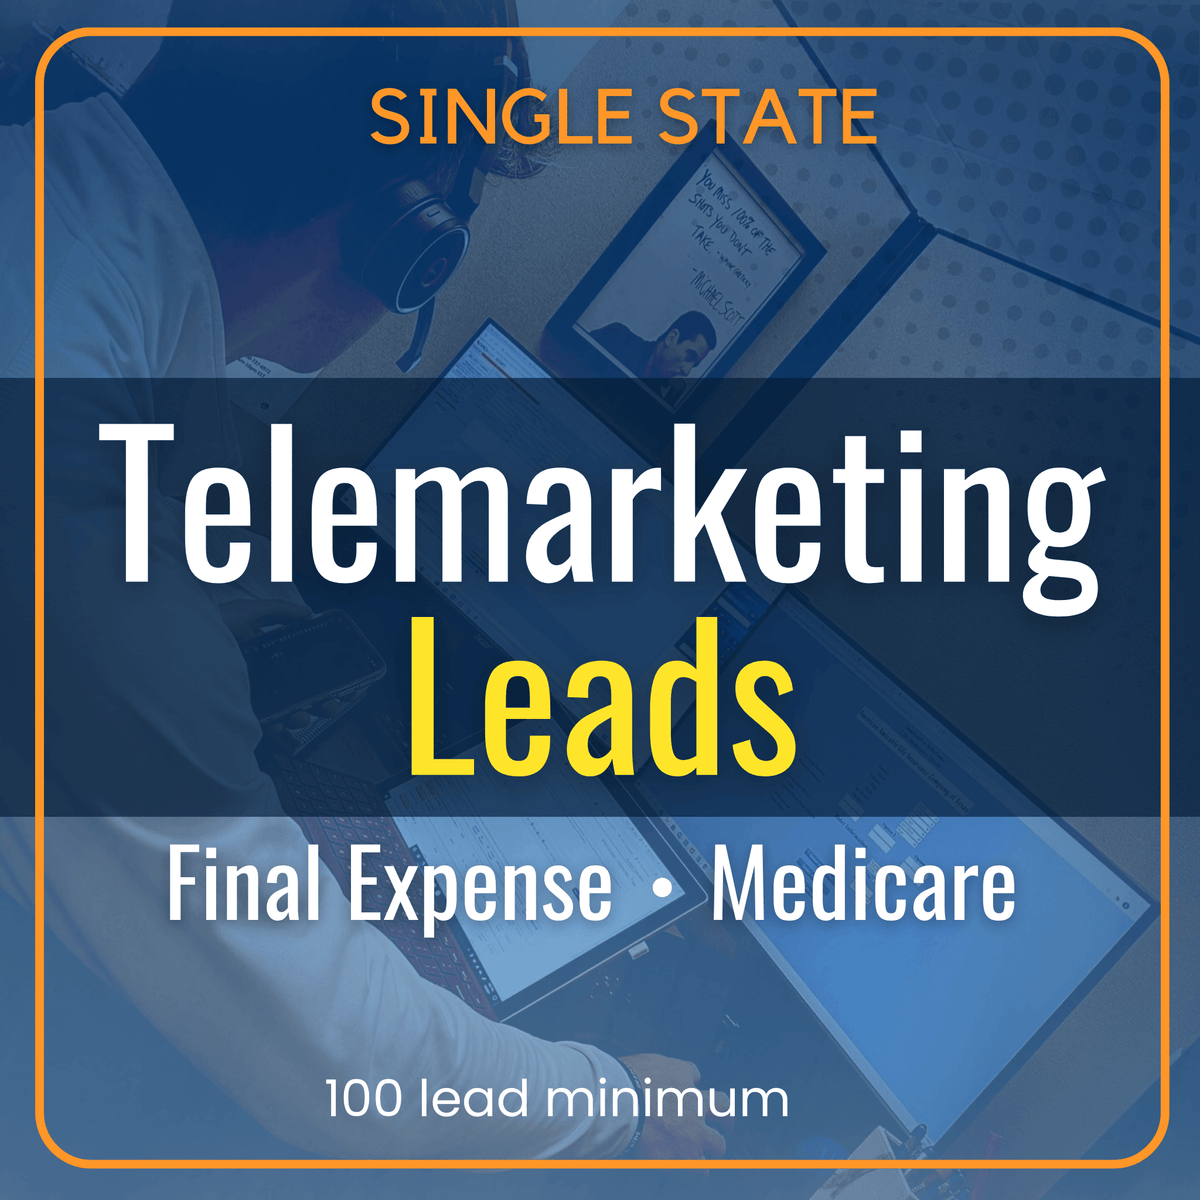 Telemarketing Leads (Single State) - All Things Insurance Group